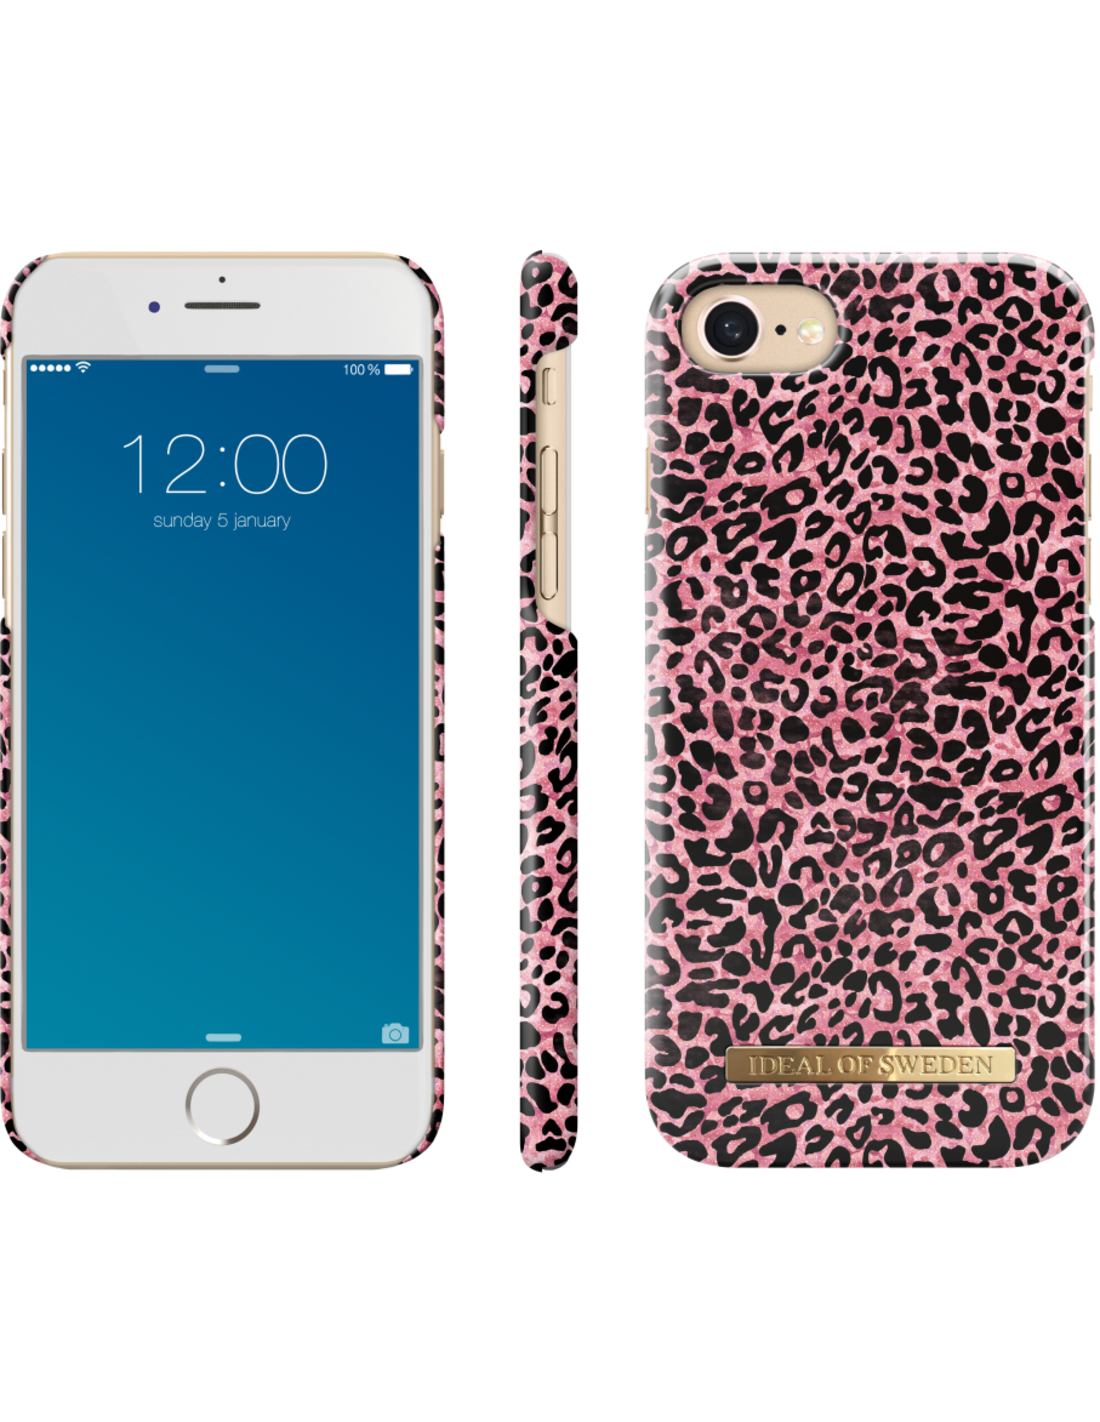 IDEAL OF SWEDEN IDFCSS19-I7-118, Lush 8, (2020), iPhone iPhone SE Apple, iPhone 6(S), 7, Leopard iPhone Backcover